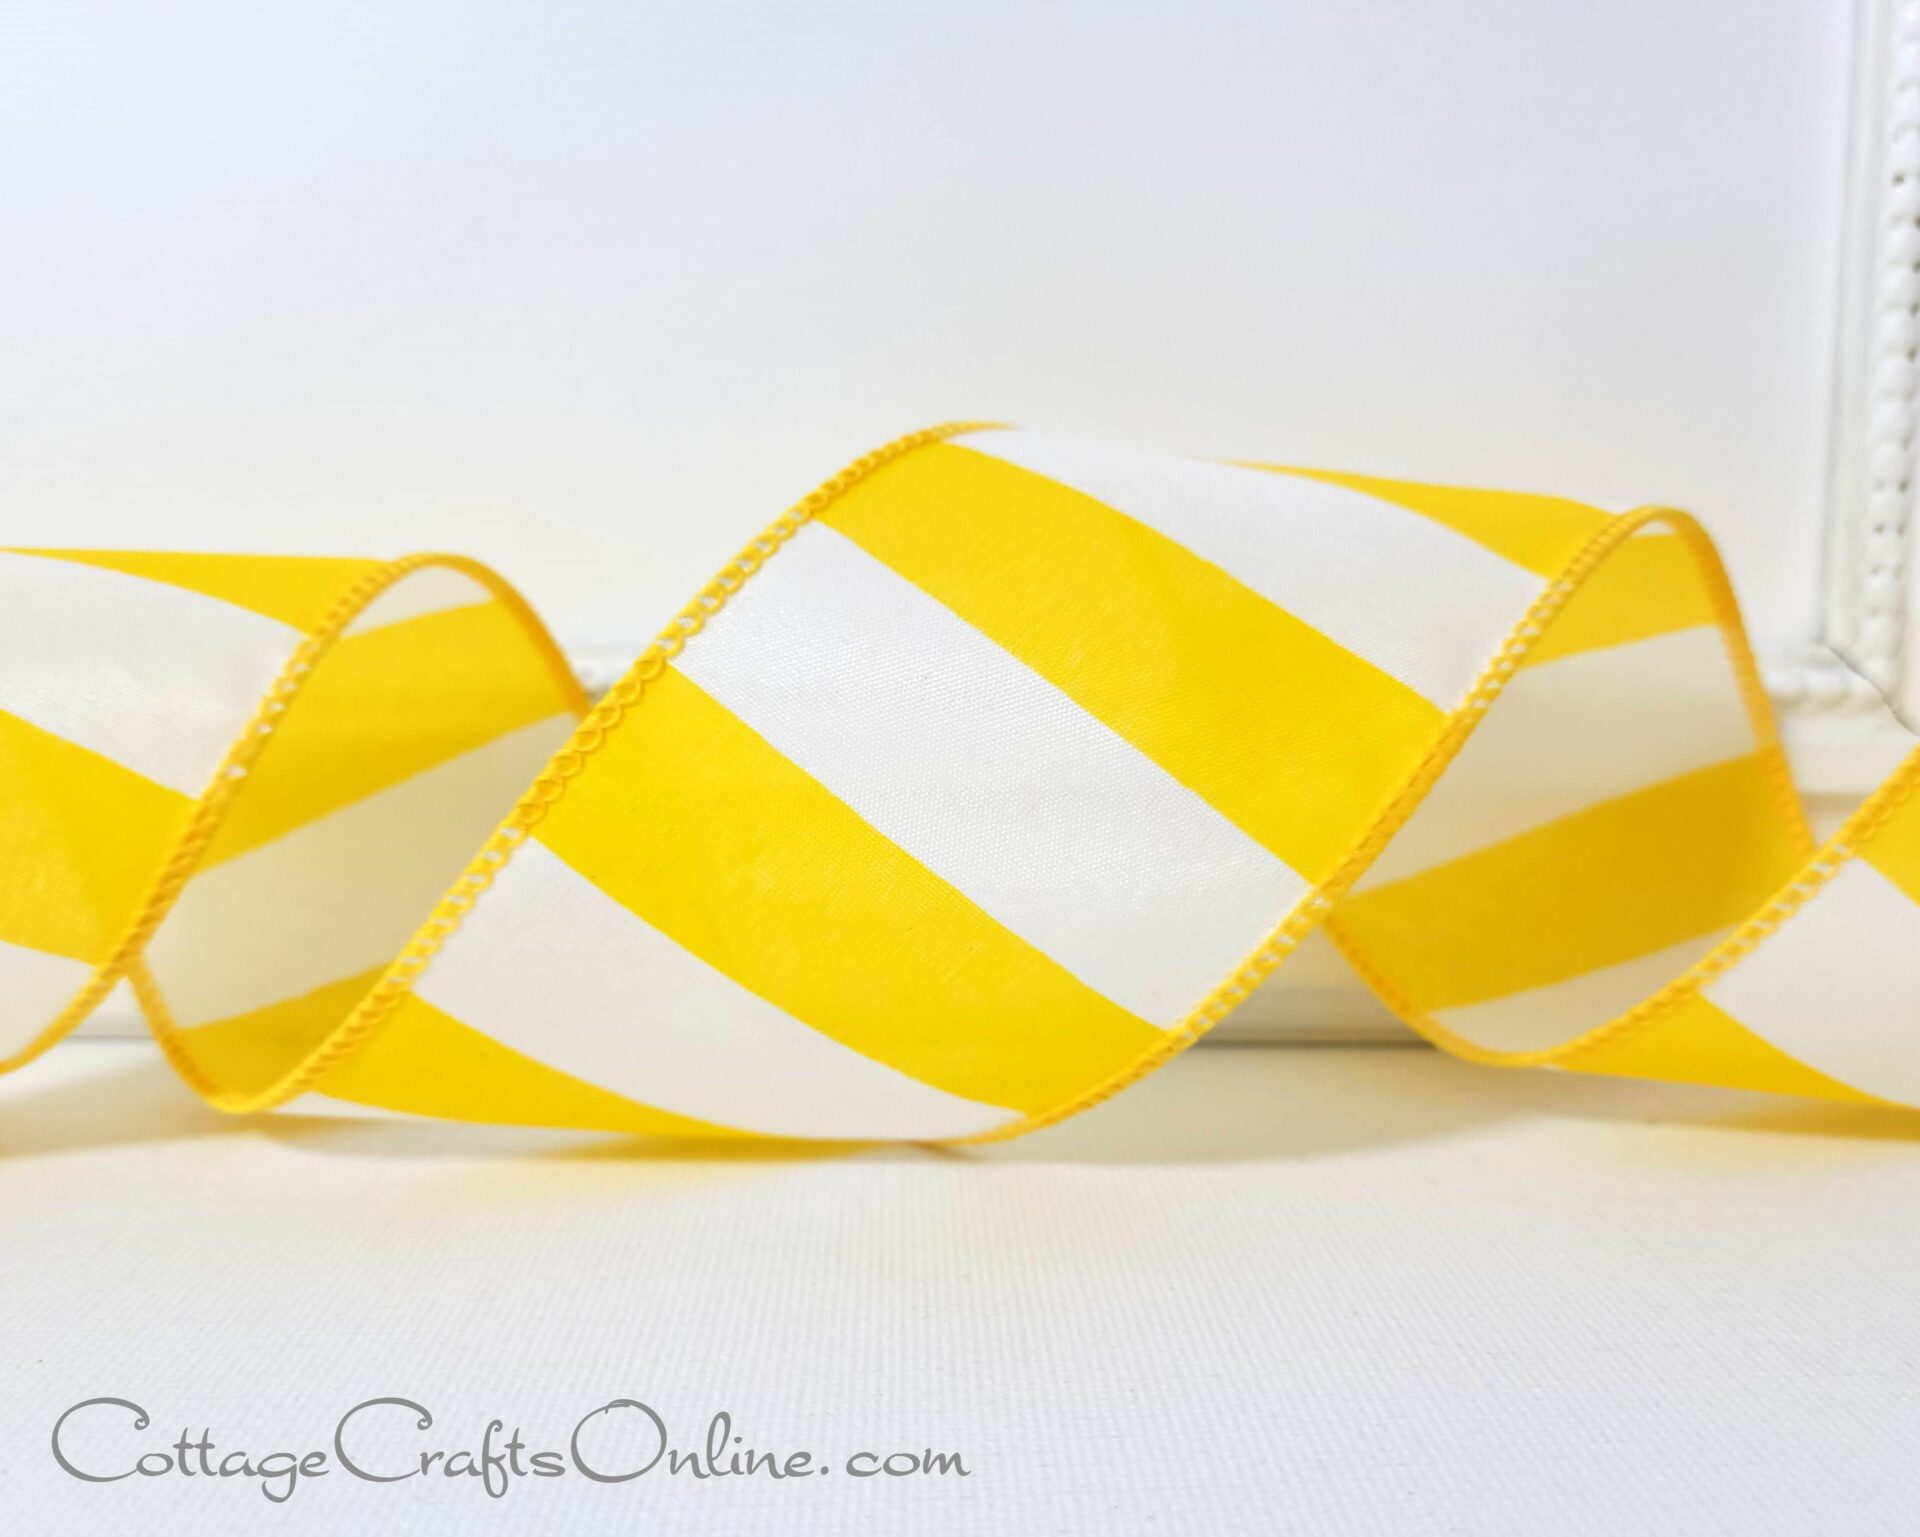 A yellow and white striped ribbon on a table.